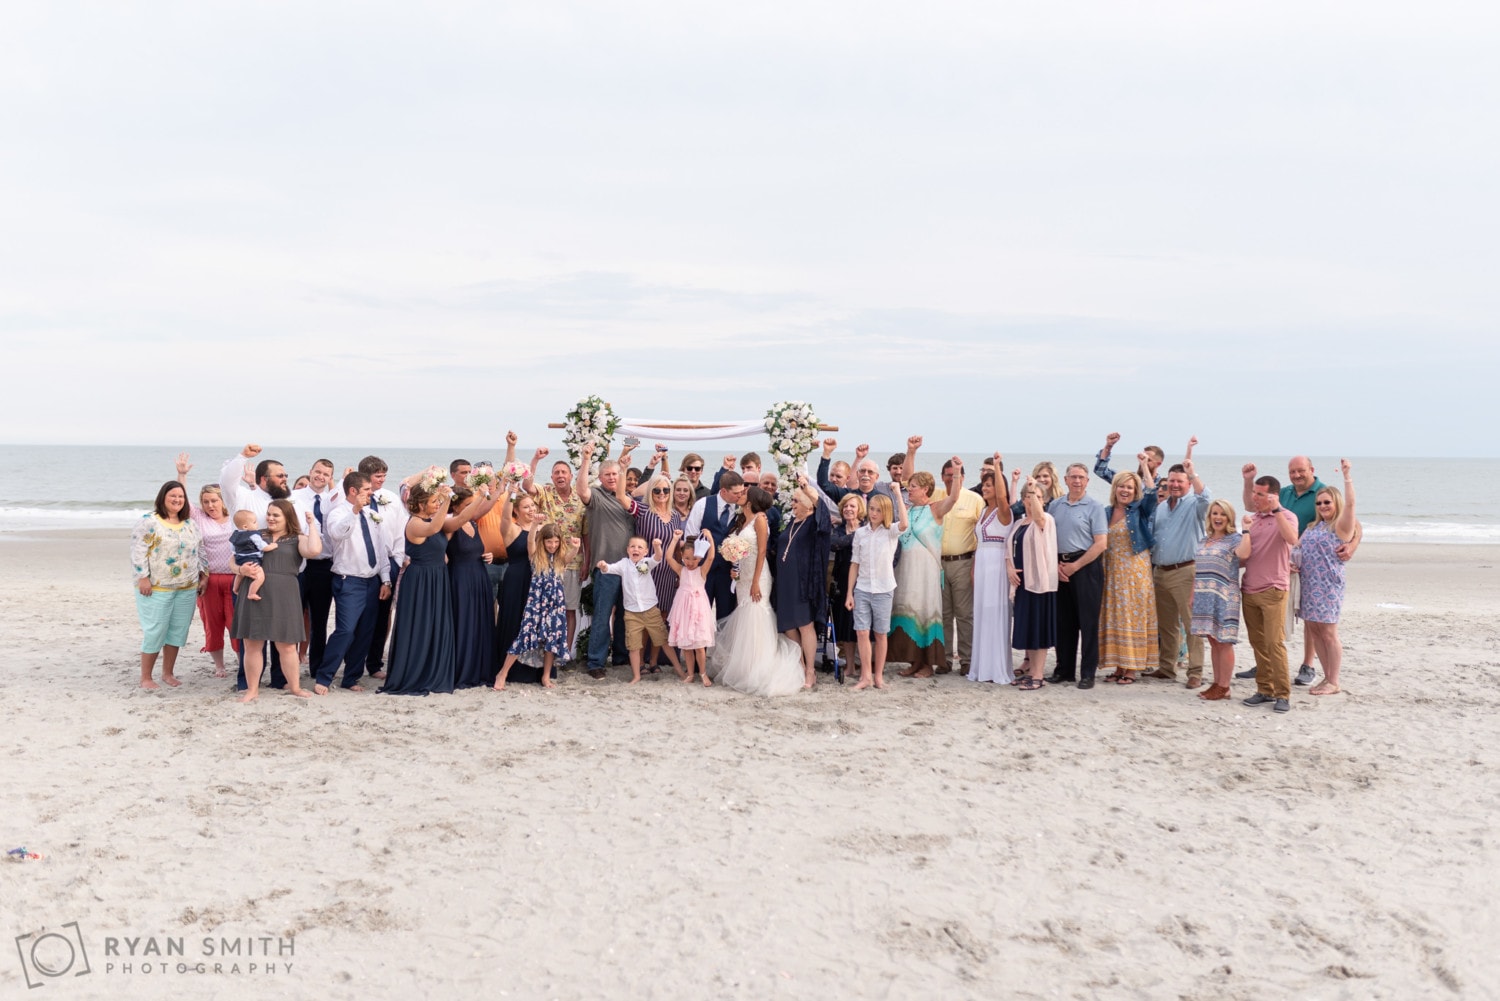 All the wedding guests cheering for bride and groom - Avista Resort - North Myrtle Beach